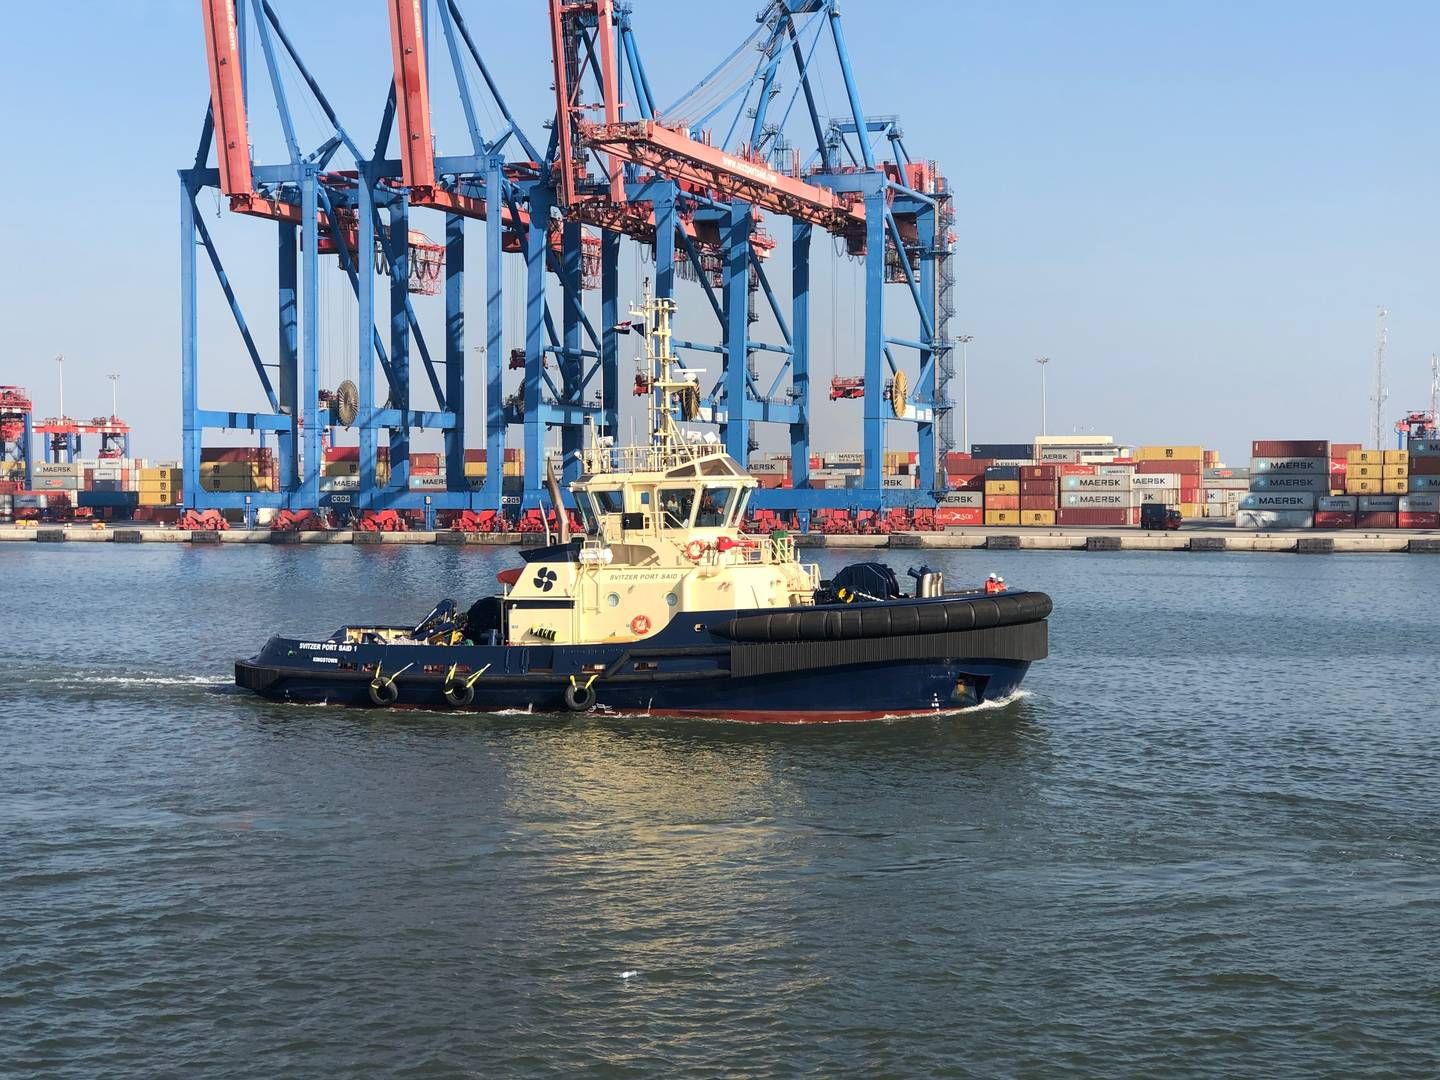 Tugboat company Svitzer could be on its way out of the Maersk group alongside Maersk Supply, Maersk Container Industry and Maersk Training. | Foto: Pr/svitzer